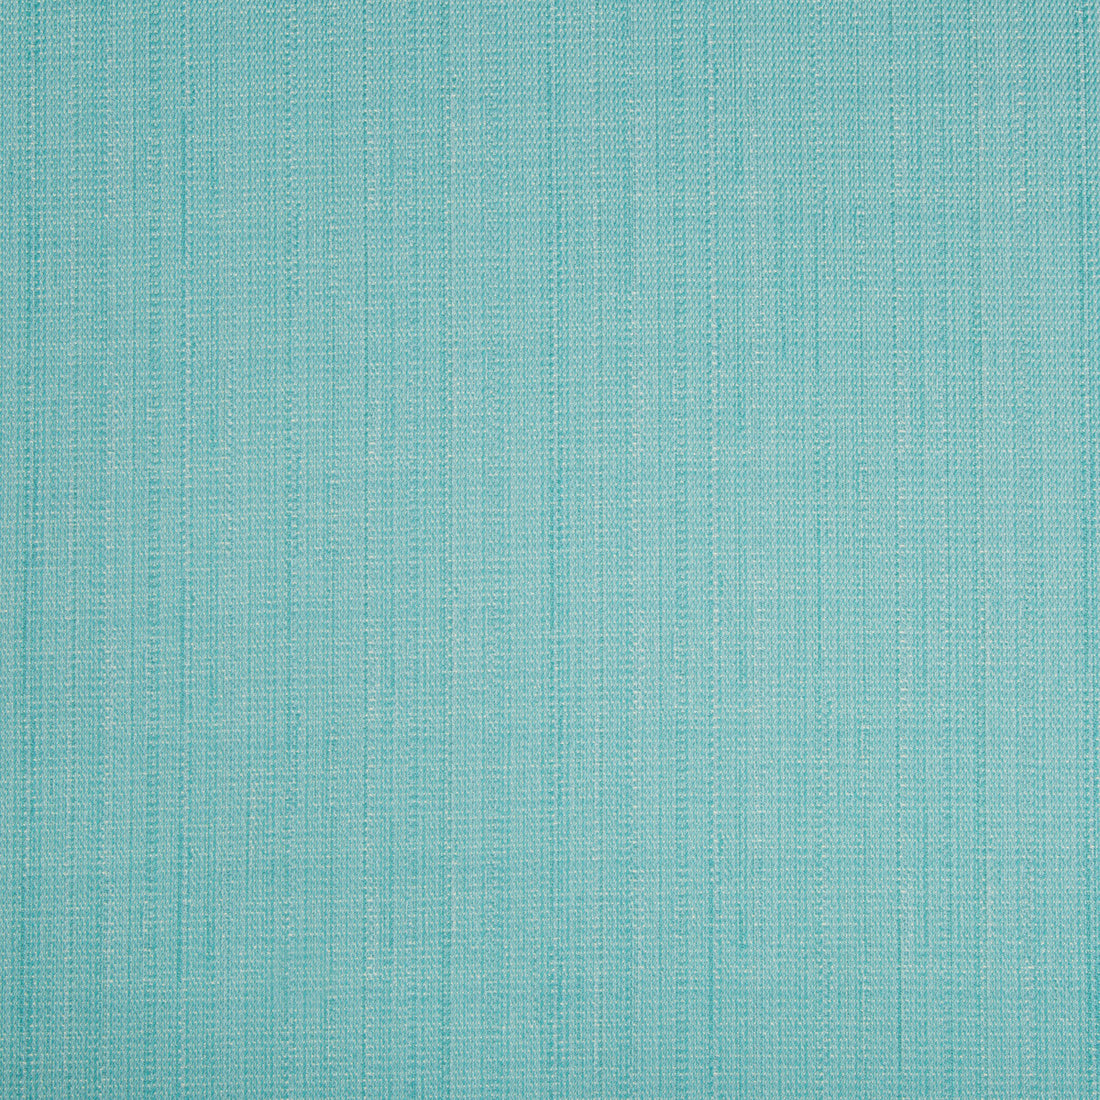 La Coche Strie fabric in aqua color - pattern 8017146.13.0 - by Brunschwig &amp; Fils in the En Vacances collection